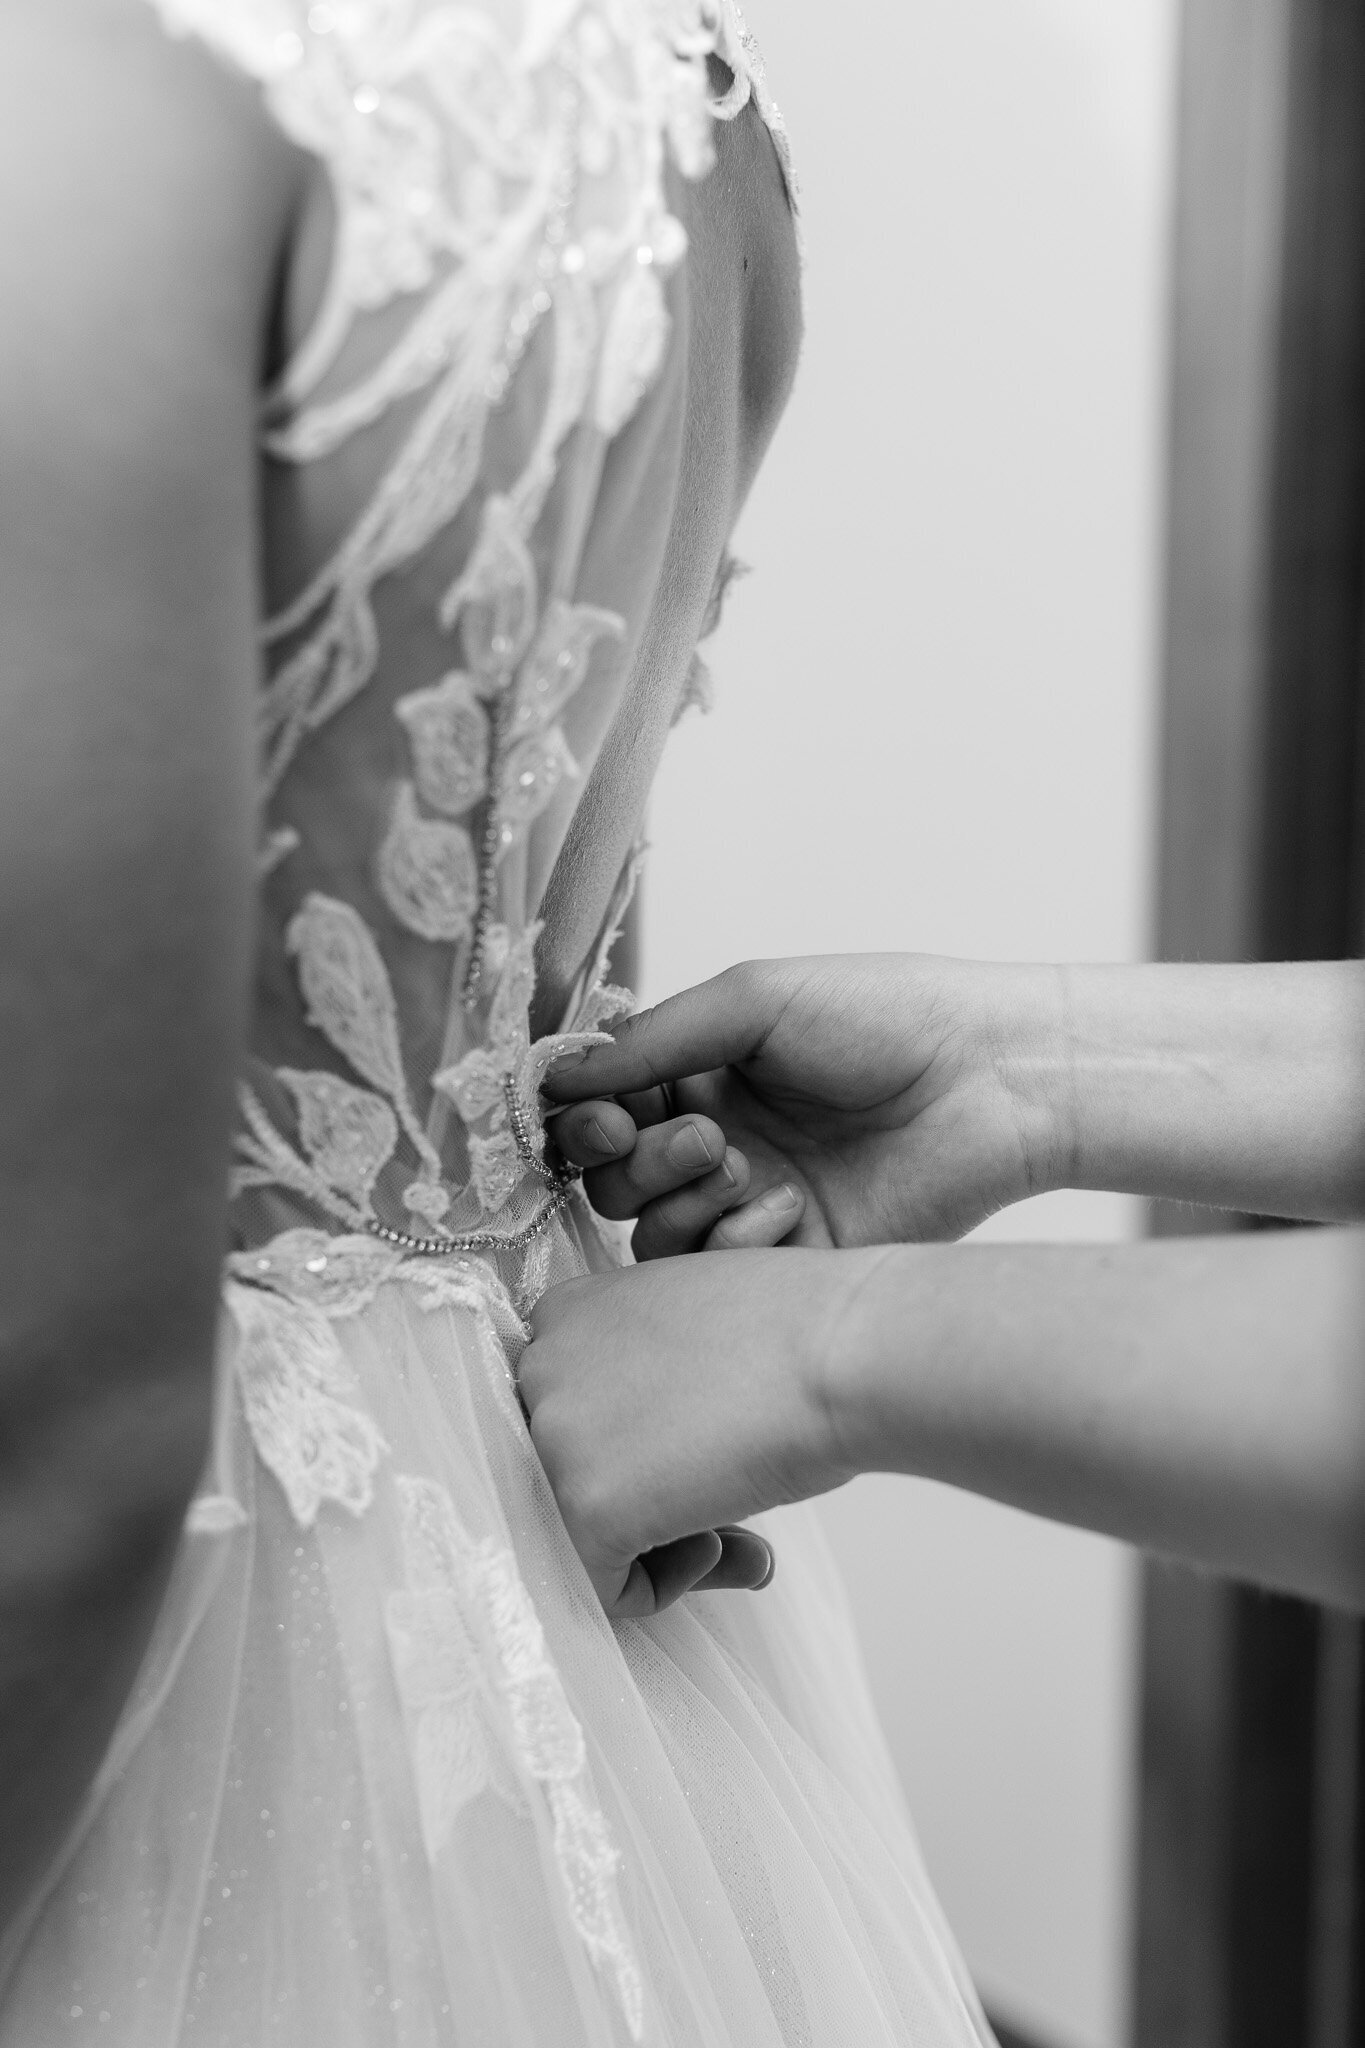 Maid of honor helping bride zip back of dress in black and white